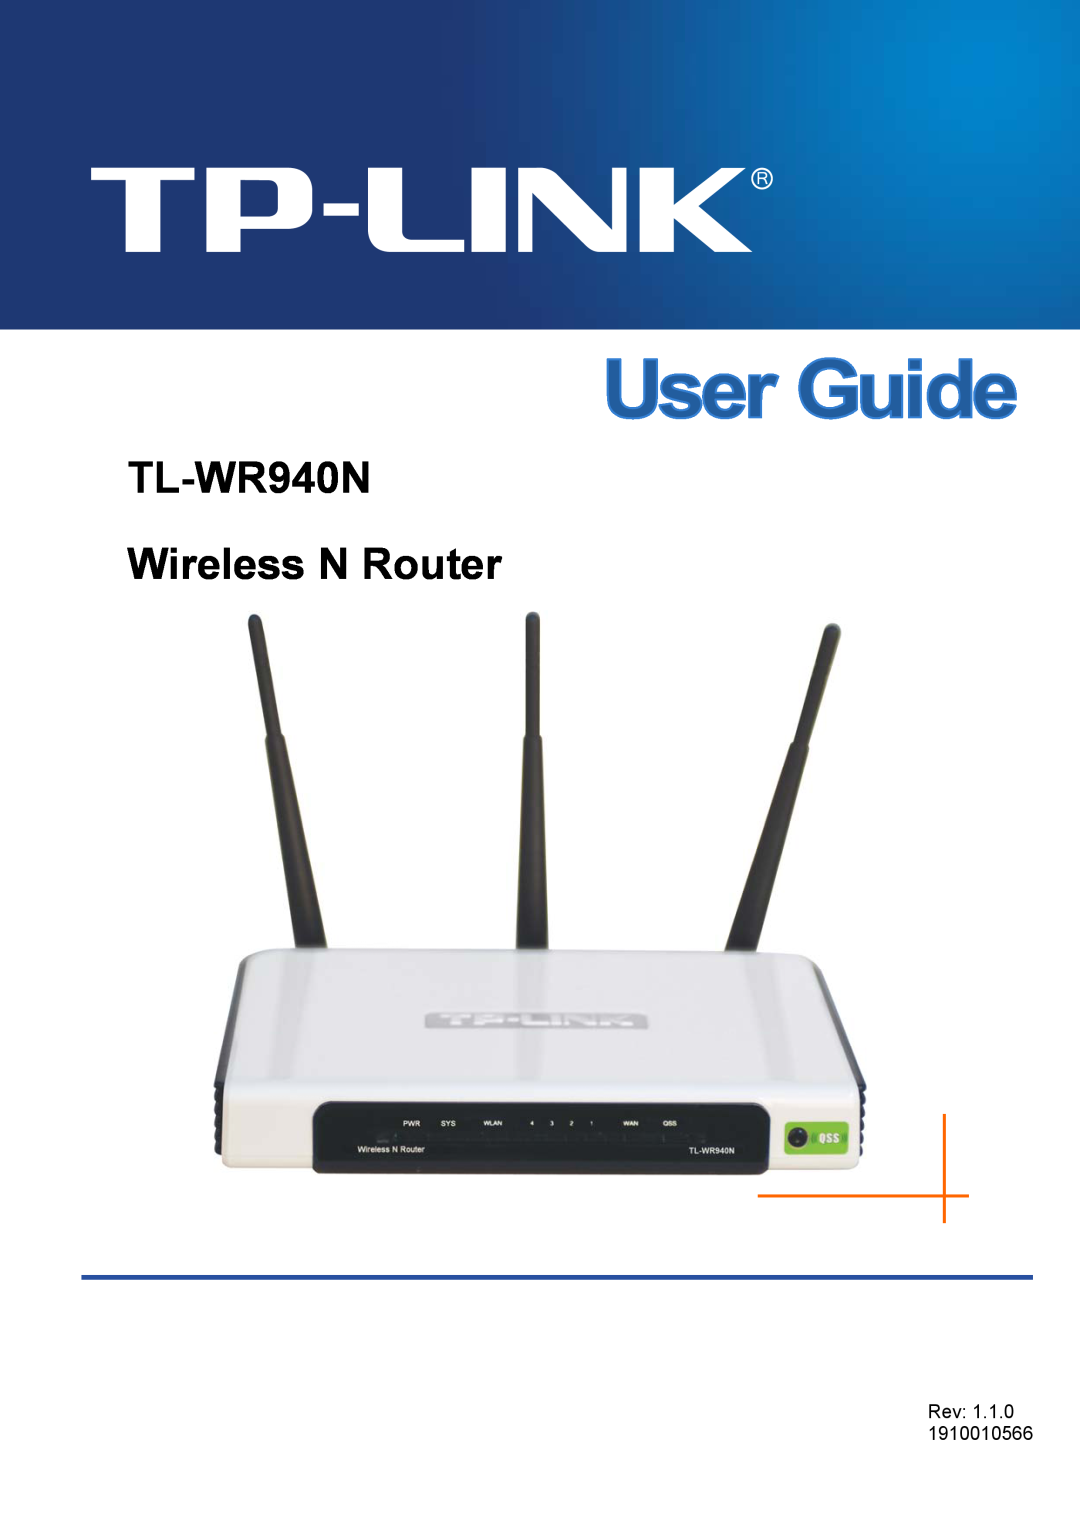 TP-Link manual TL-WR940N Wireless N Router, Rev 1.1.0 